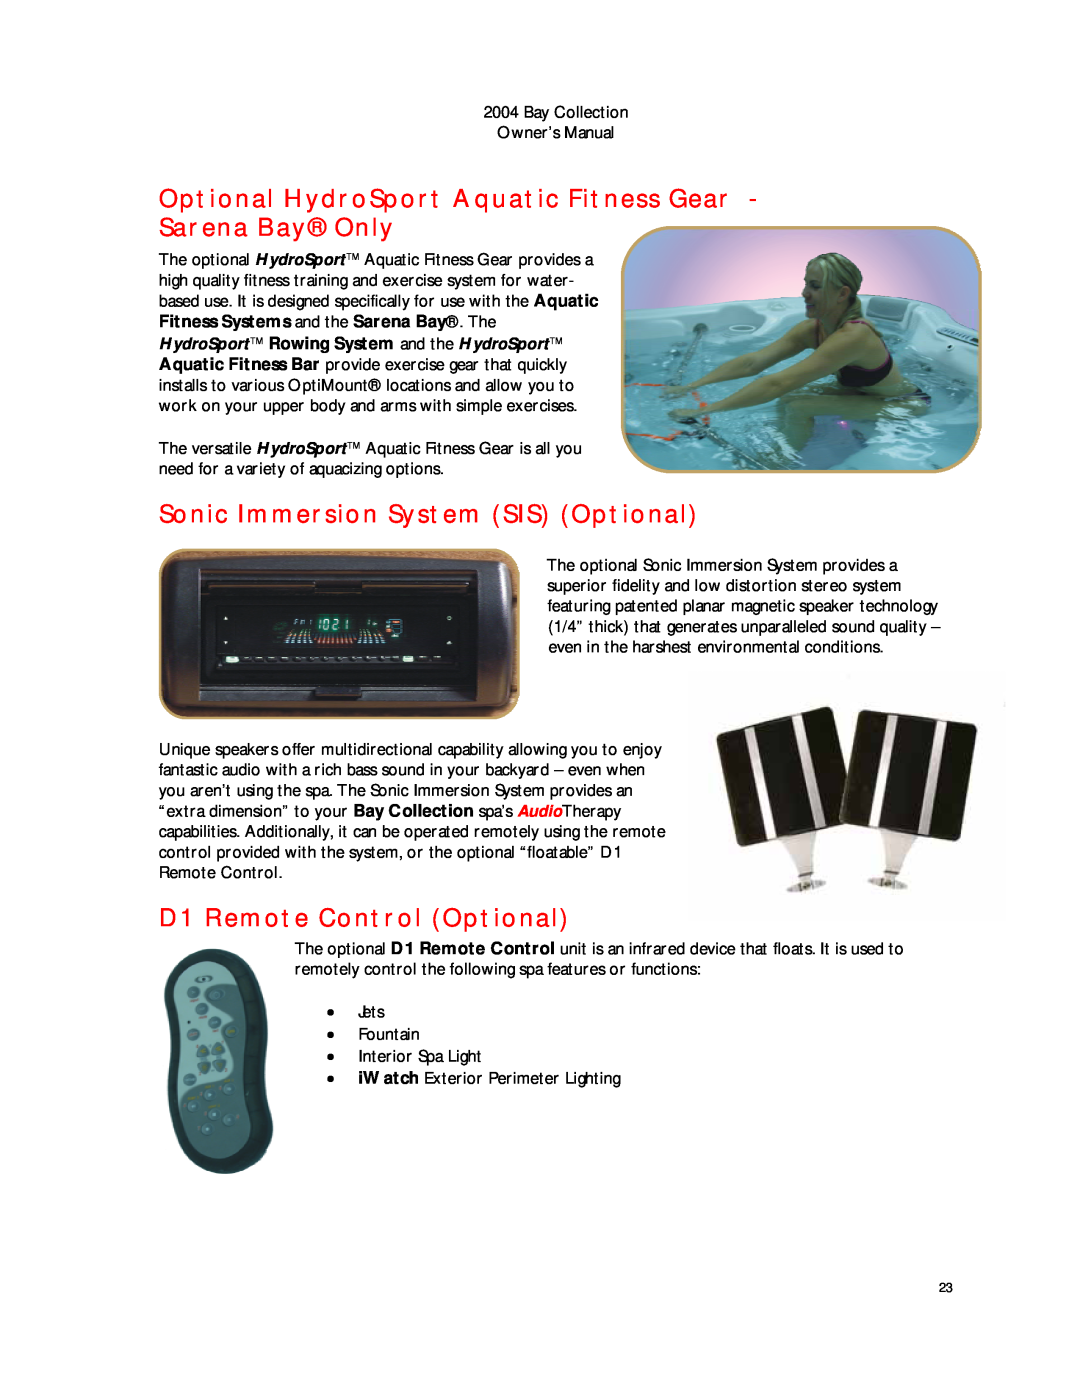 Dimension One Spas Bay Collection Optional HydroSport Aquatic Fitness Gear - Sarena Bay Only, D1 Remote Control Optional 